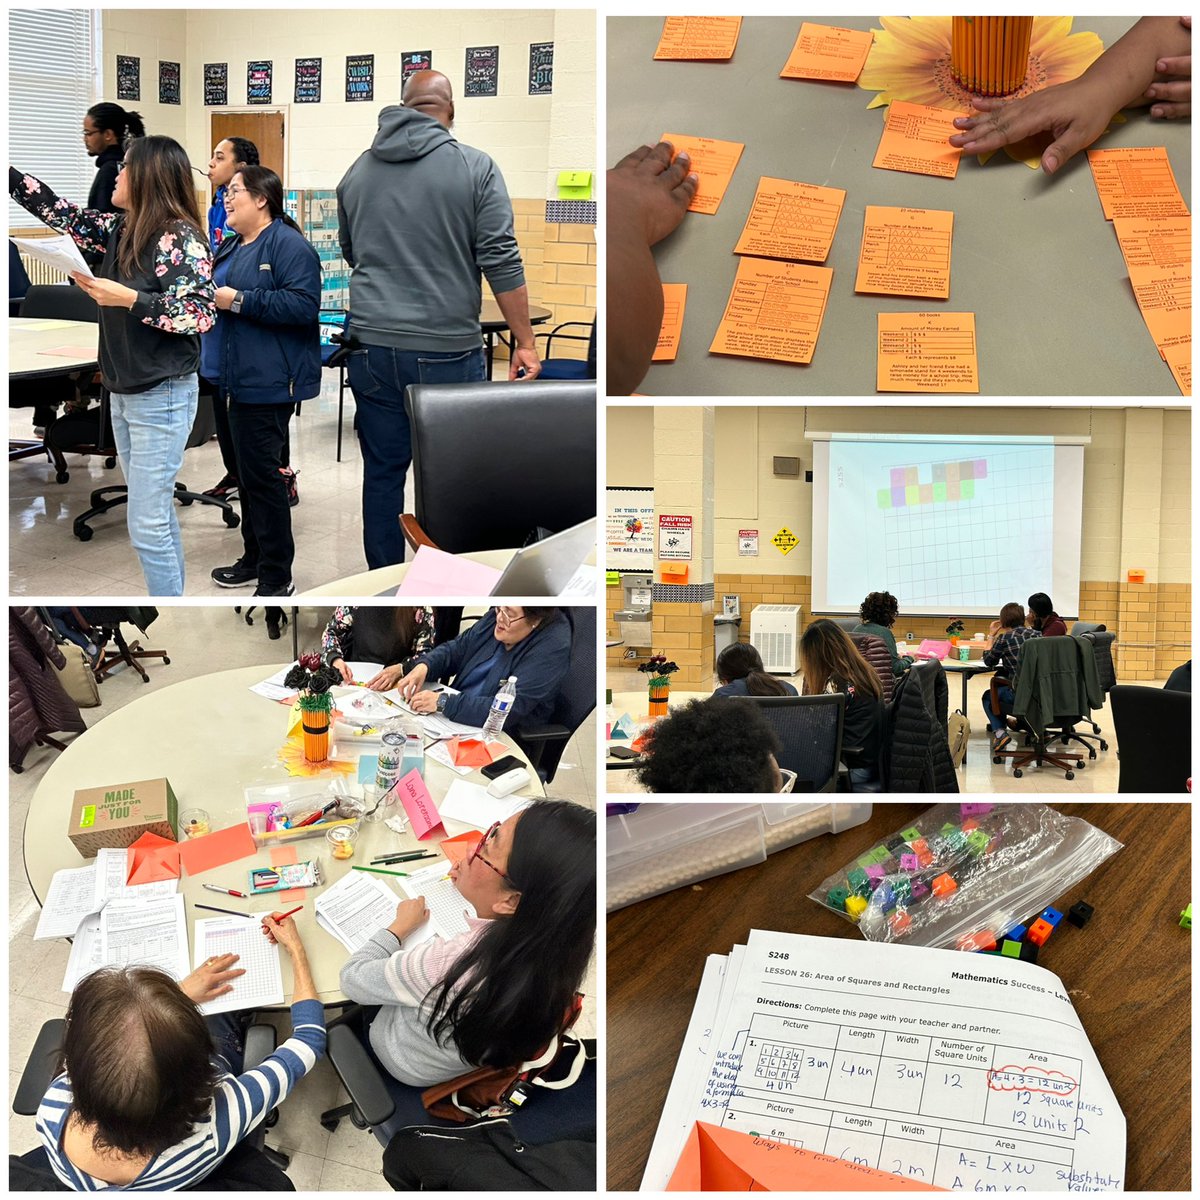 Check out these phenomenal Grade 3 math teachers engaging in measurement & data activities to plan and prepare for upcoming units!! Hands on activities & multiple representations are 🔑for deepening student understanding. @PGCPSCurriculum